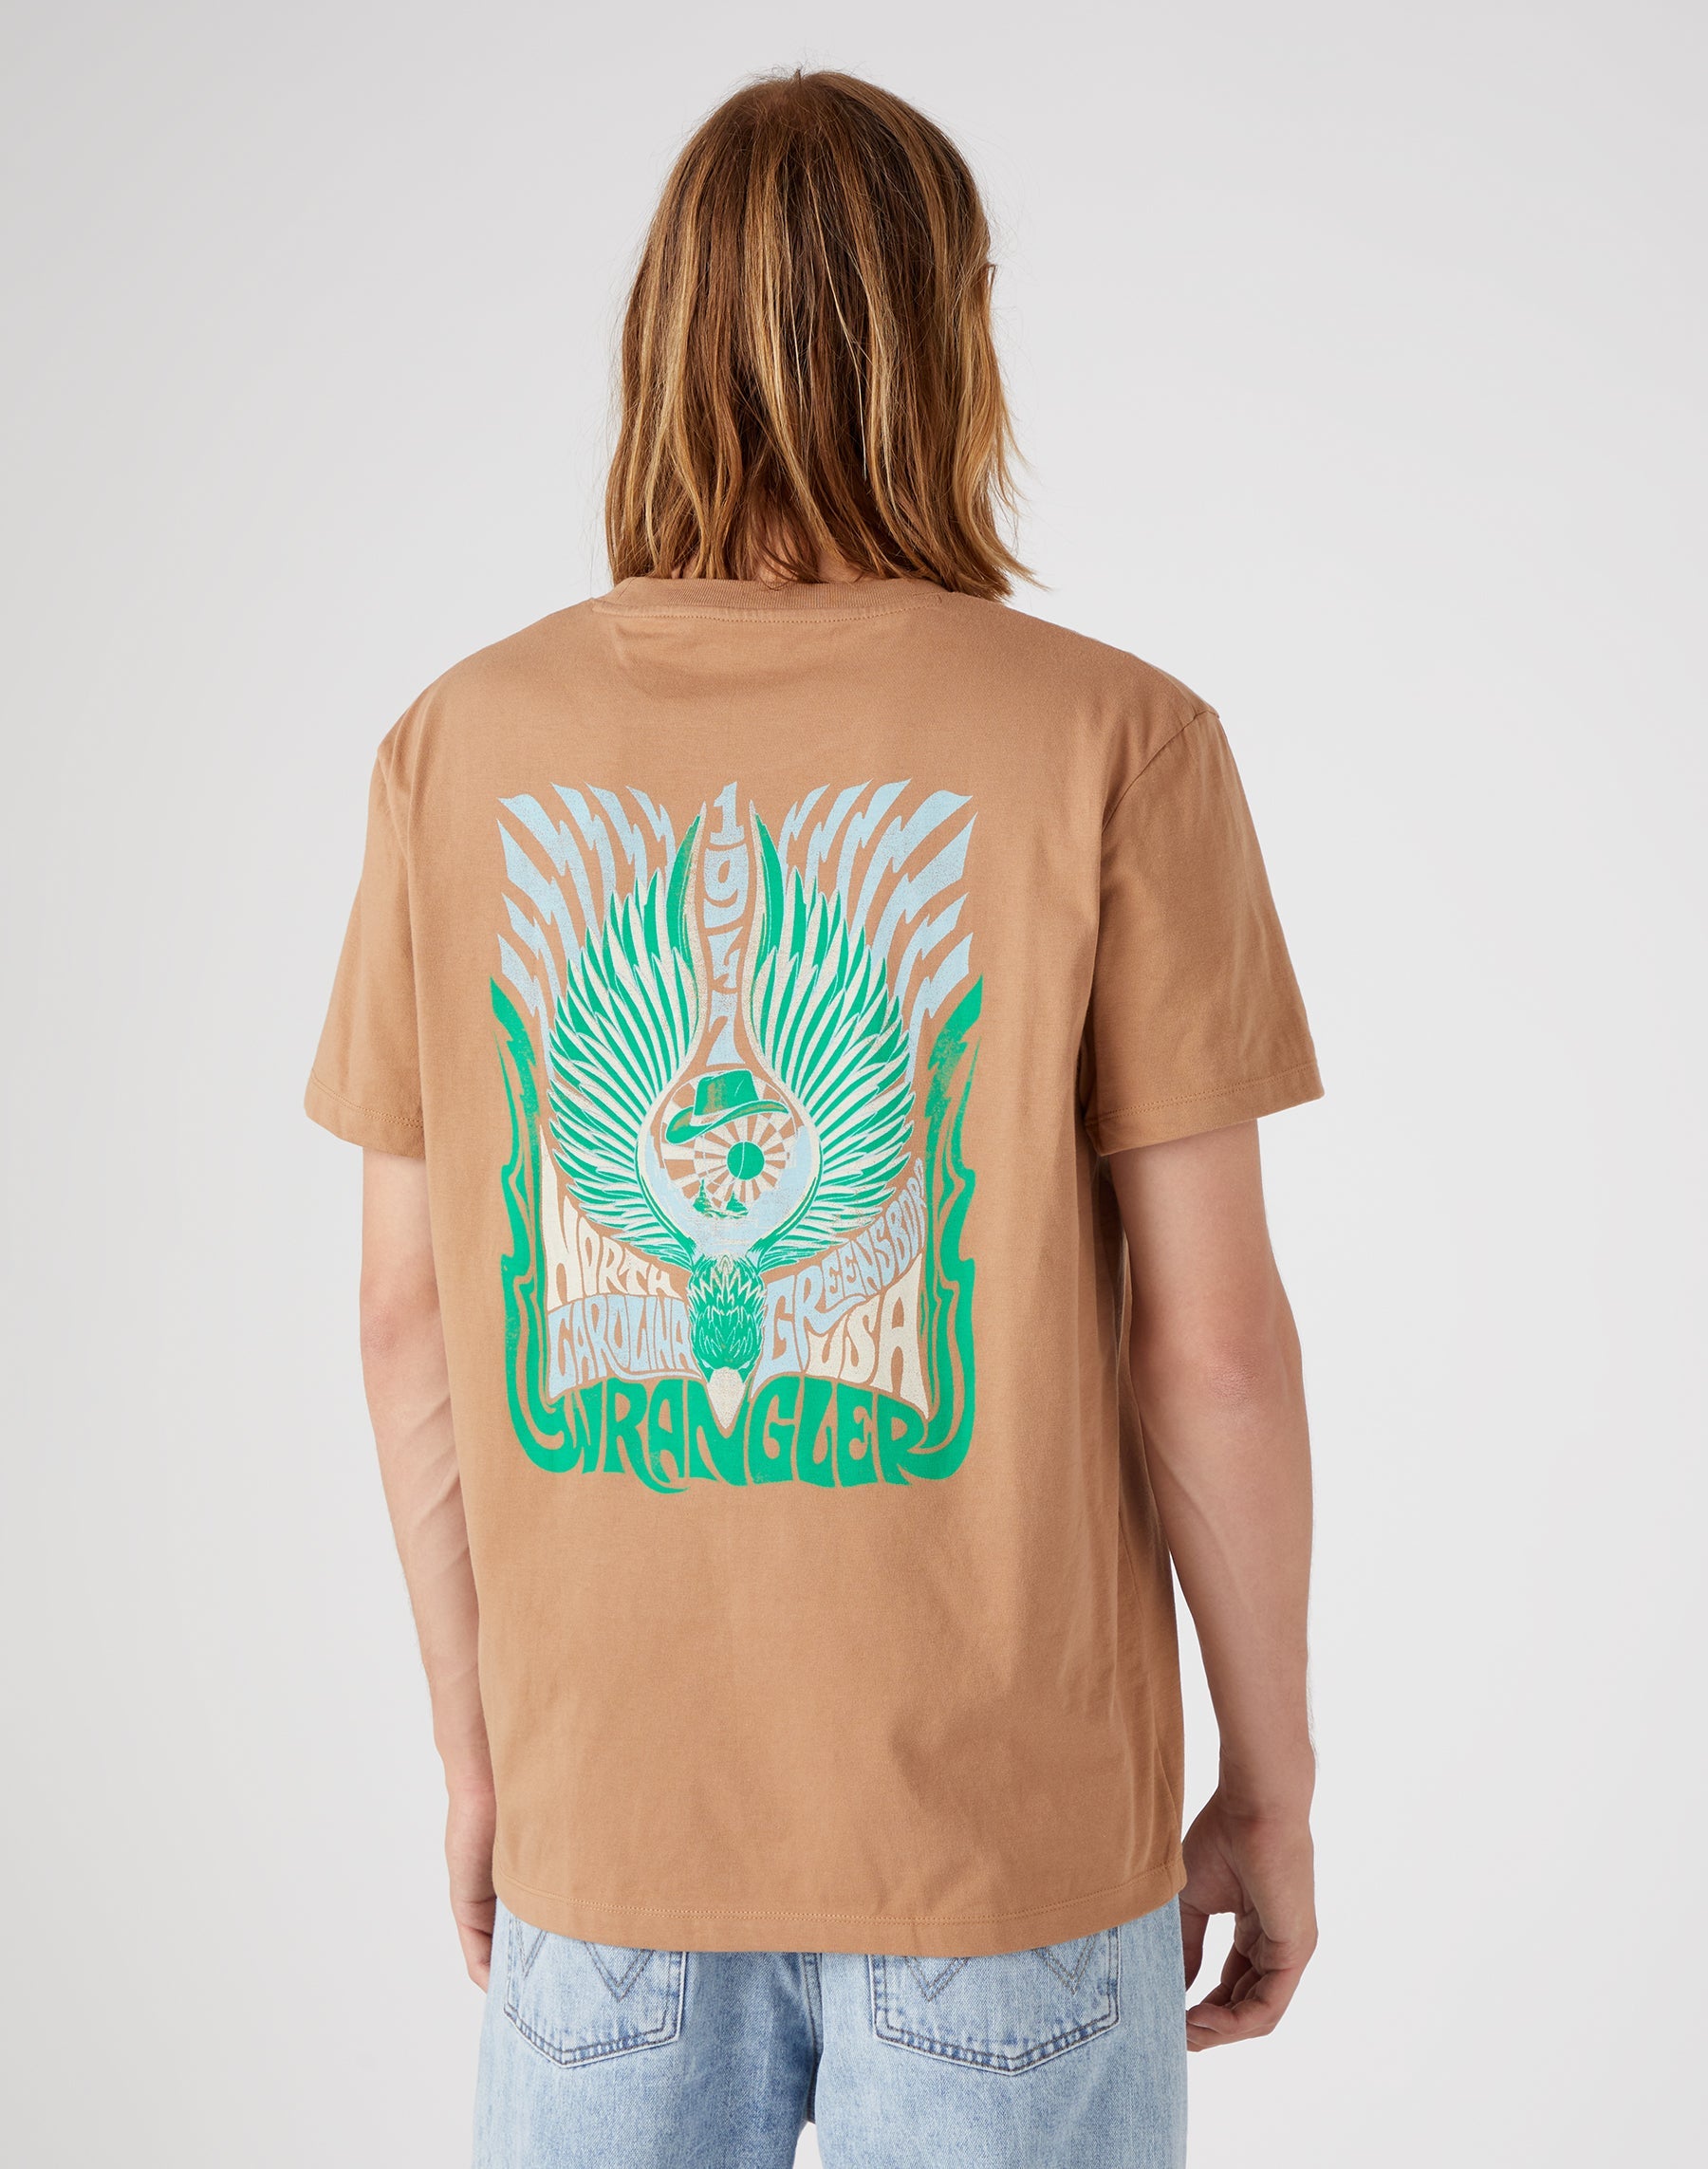 Graphic Tee in Burro Brown T-Shirts Wrangler   